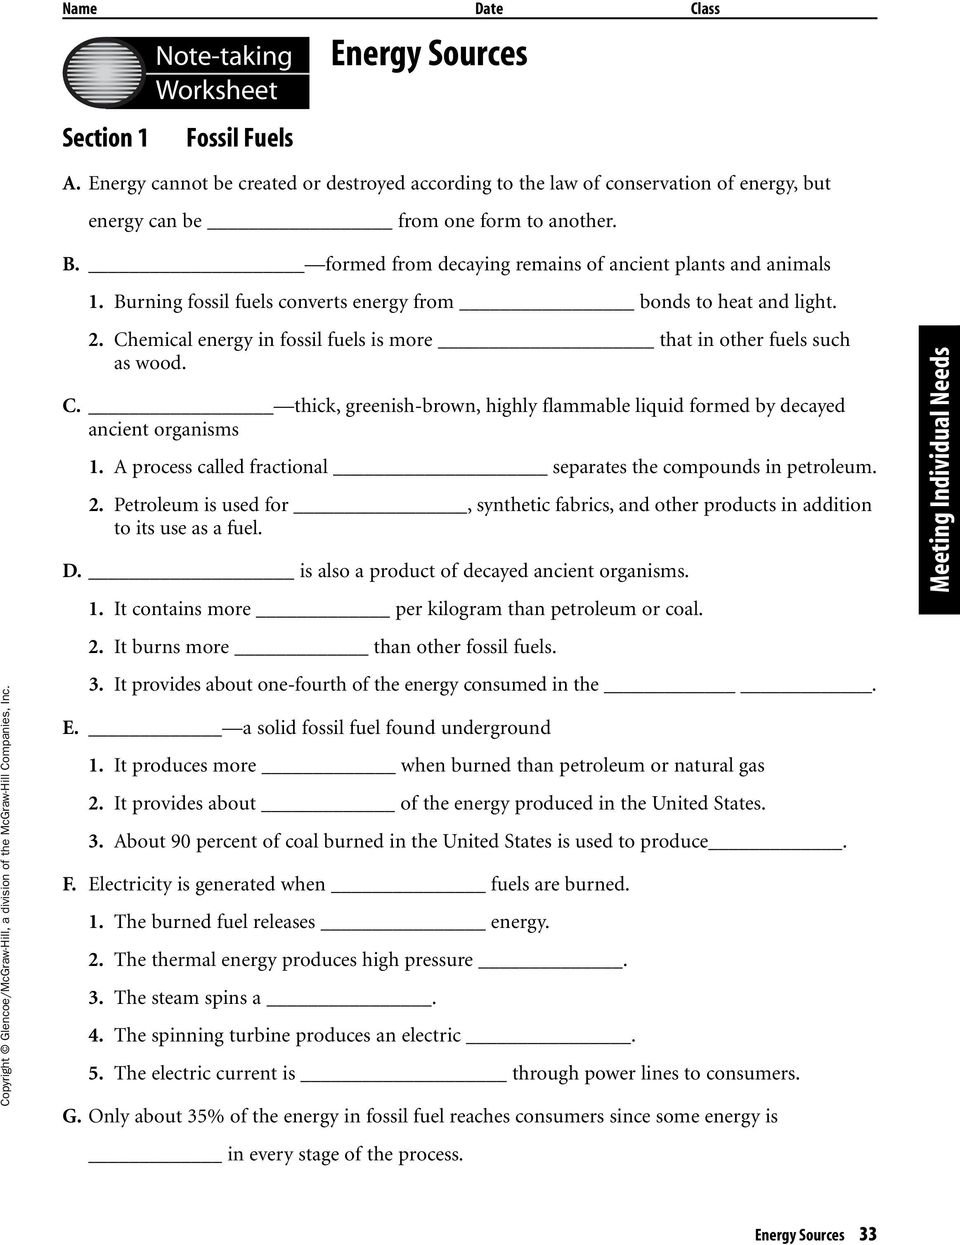 Energy Sources Chapter Resources Includes Glencoe Science For Note Taking Worksheet Electricity